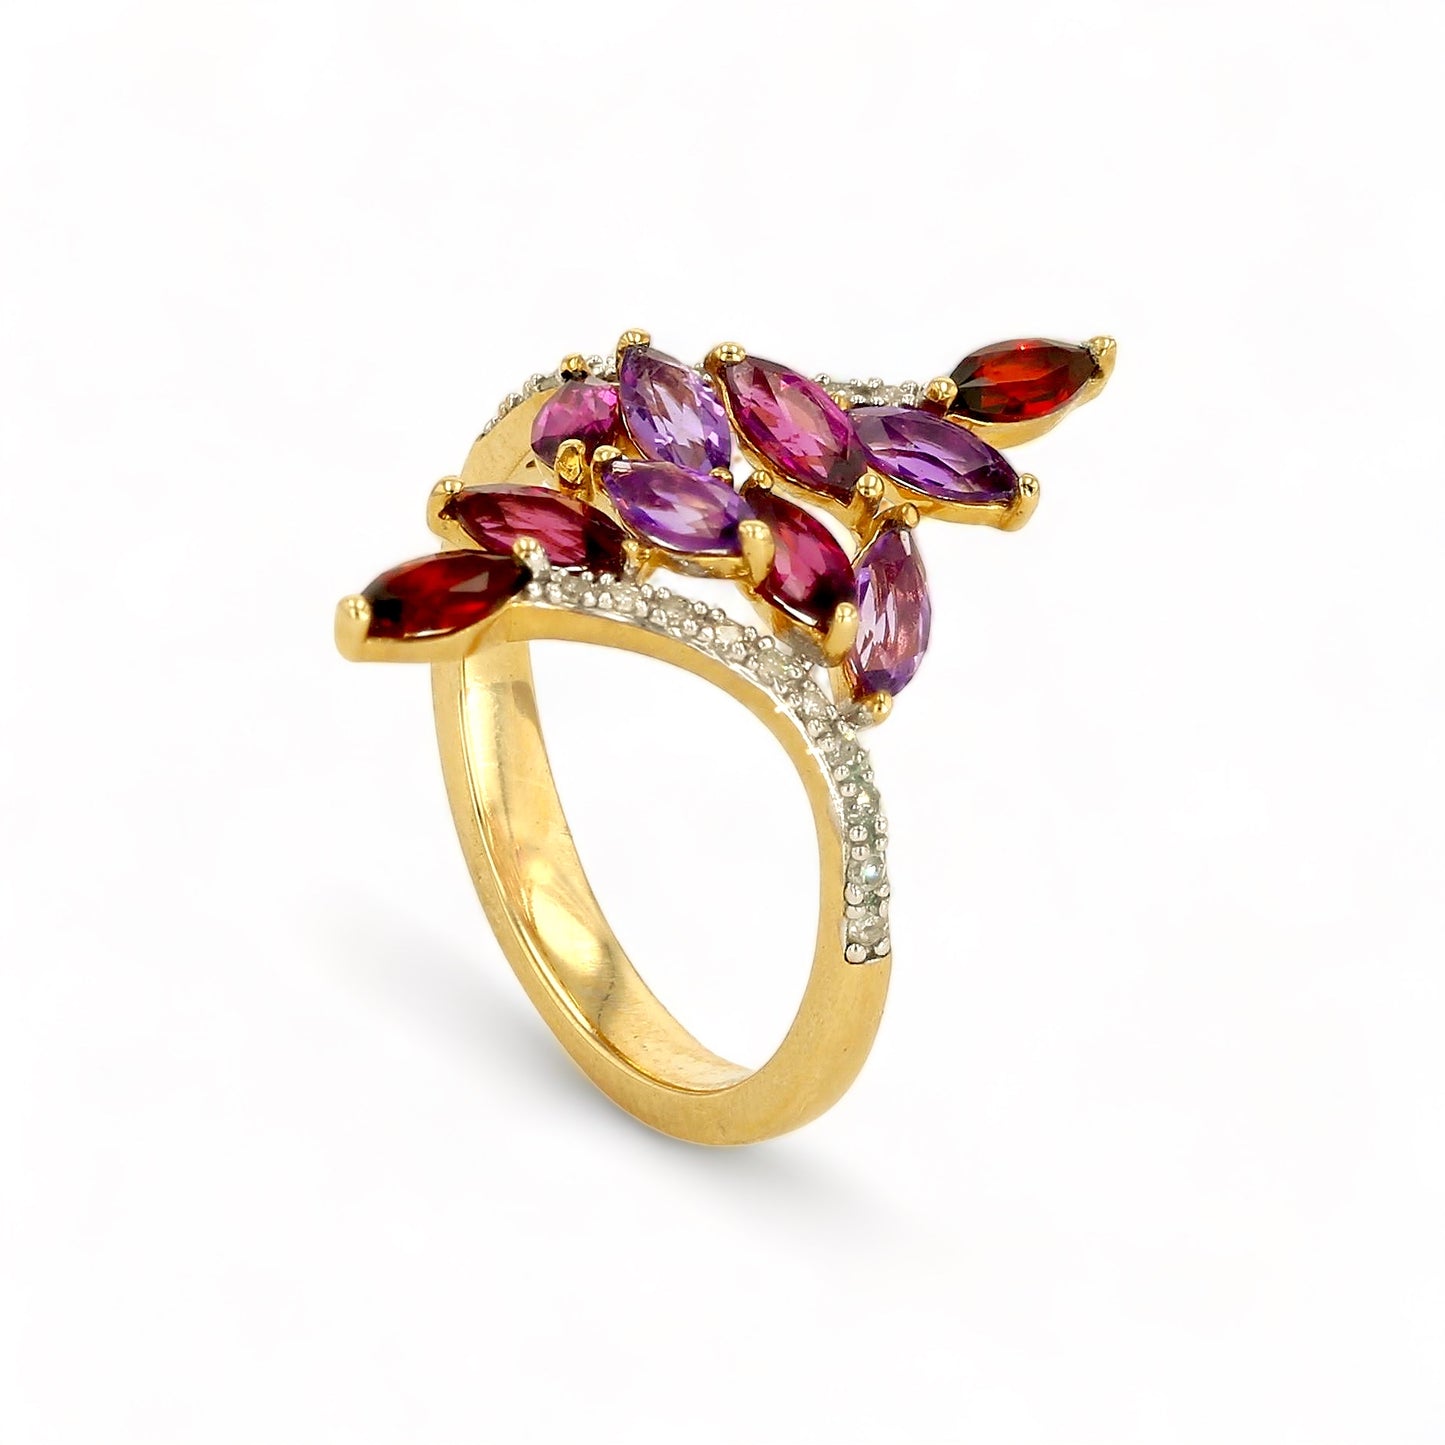 10k yellow gold cocktail color gems stone garnet amethyst and Rhodolite ring-18667